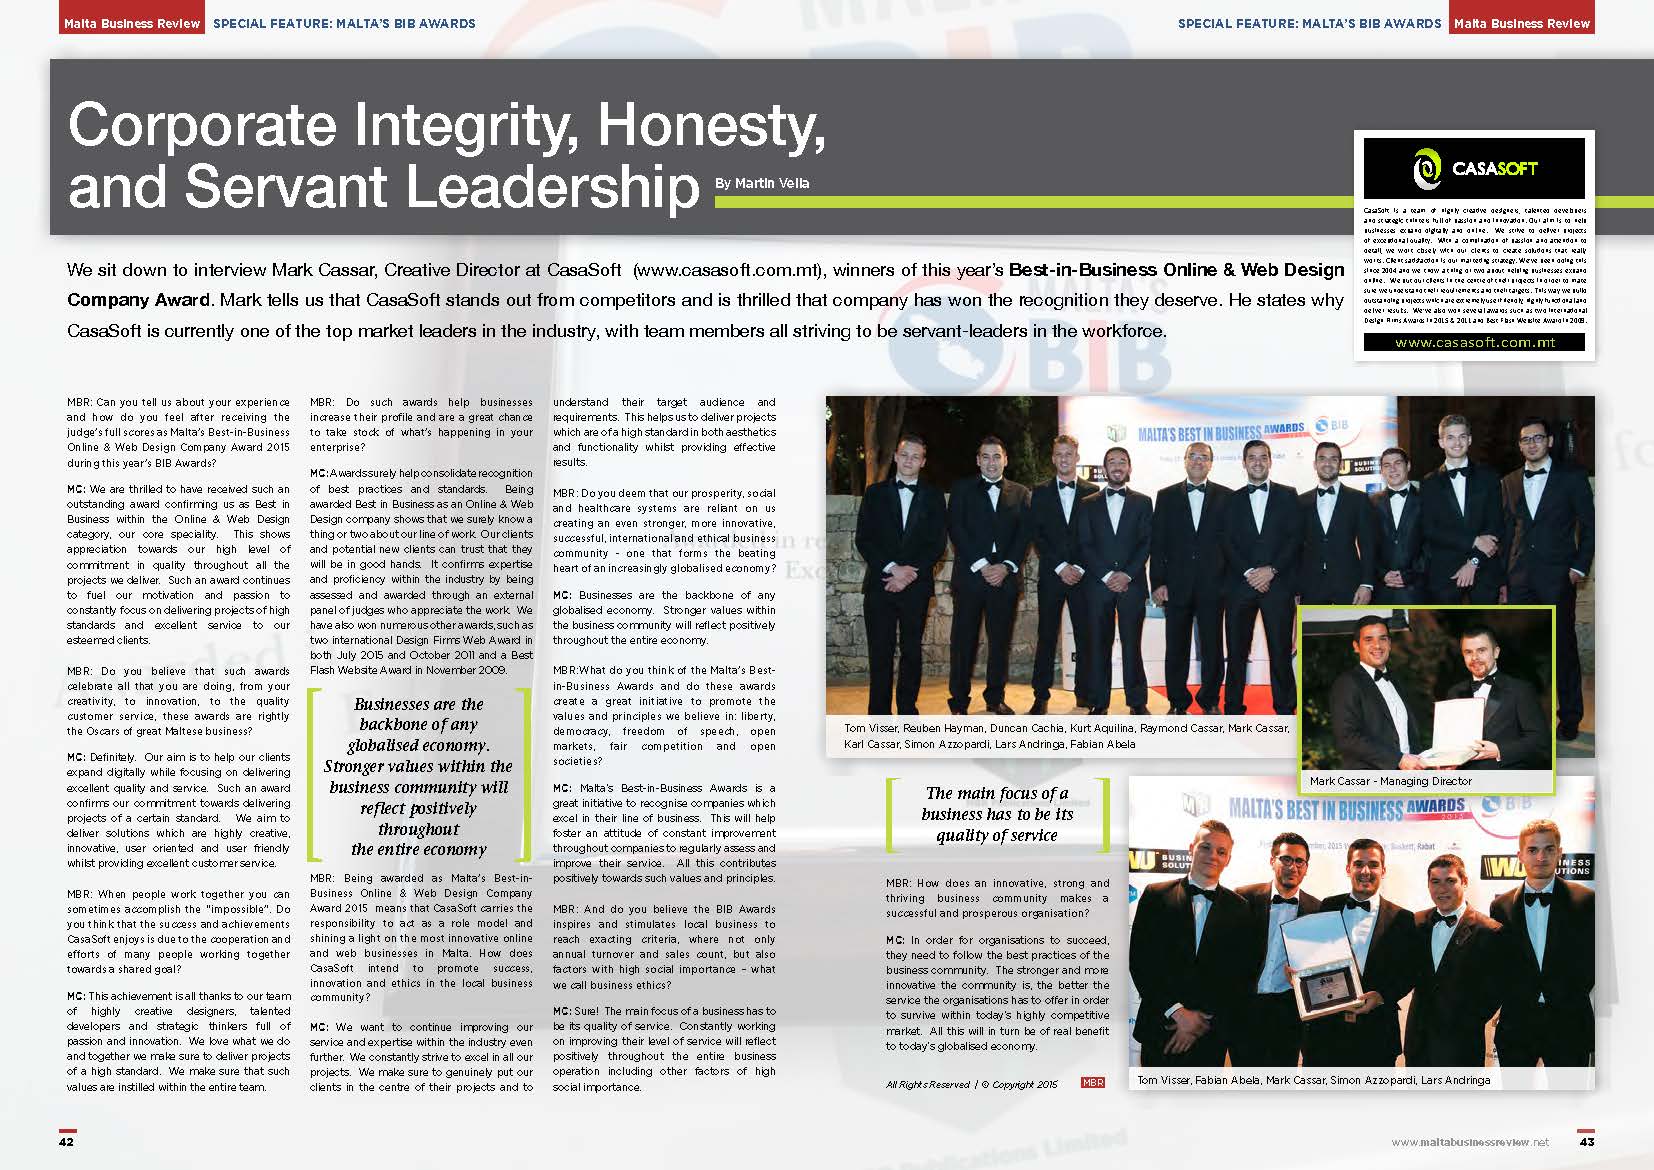 CasaSoft Malta's Best in Business Online & Web Design Agency interview in the Malta Business Review in The Malta Independent on Sunday